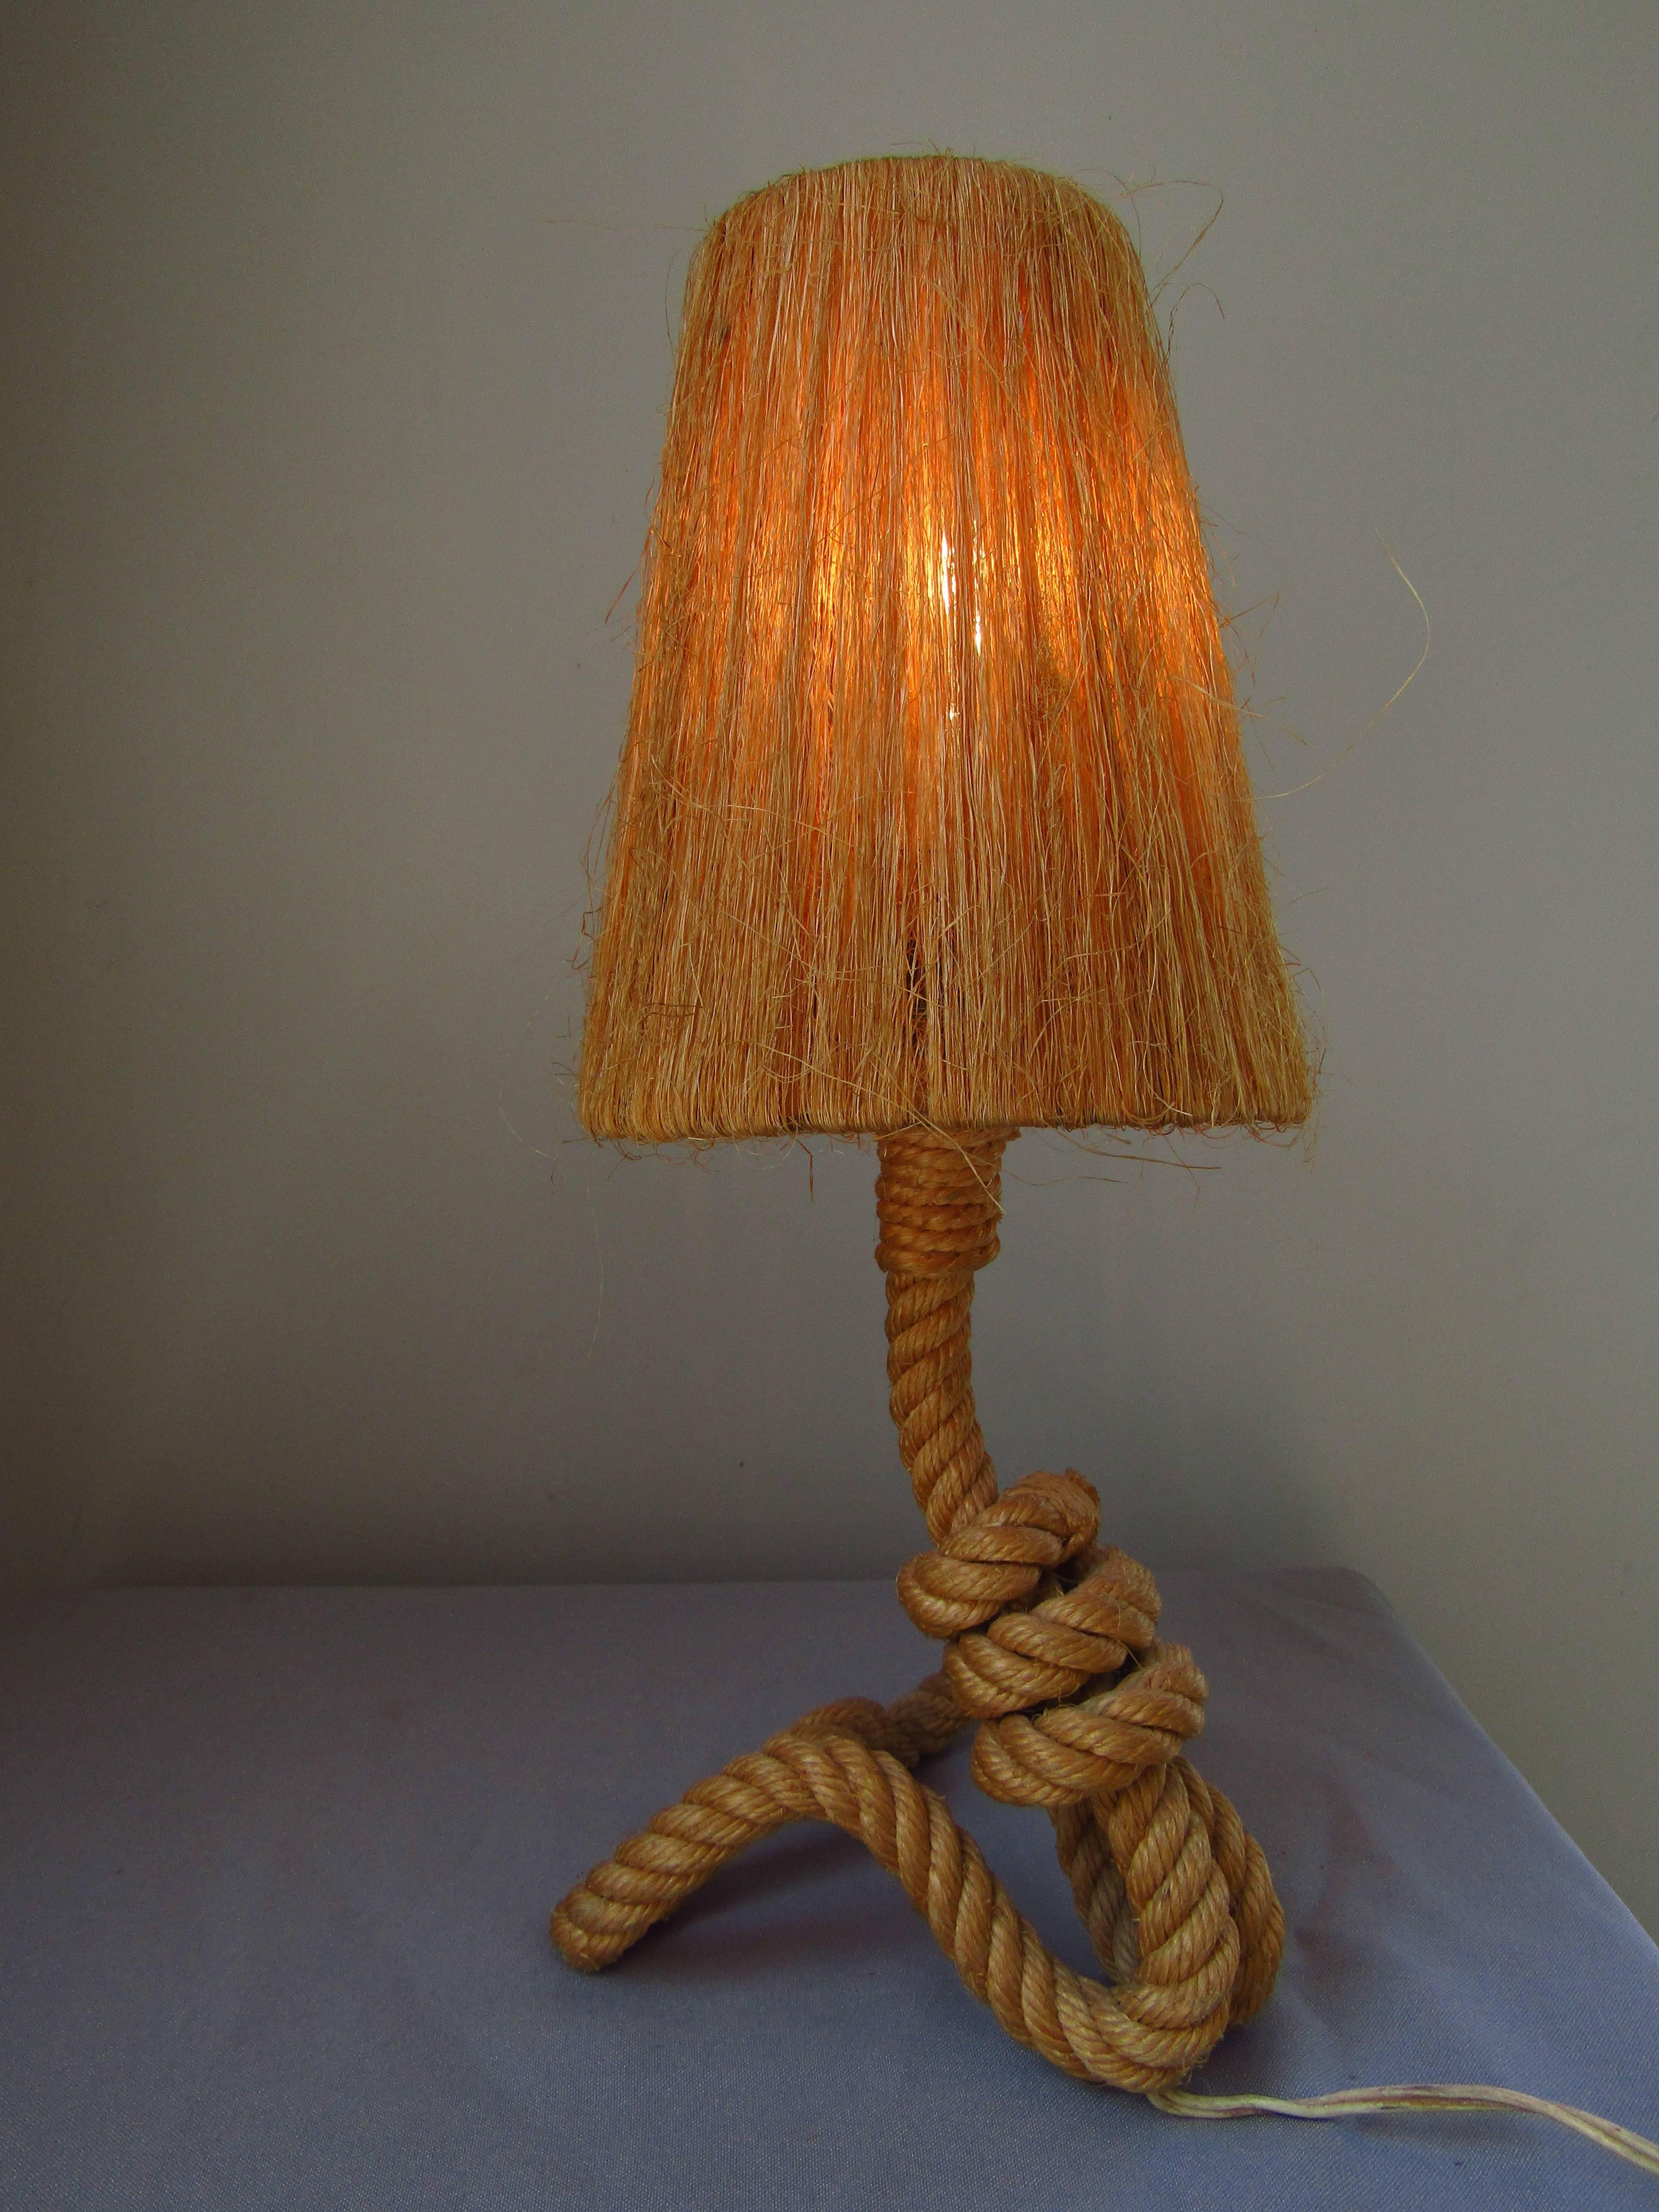 Midcentury Rope Table Desk Lamp Audoux  and Minet, France 1960s. With original shade. 100% original condition!

*** World wide free shipping! ***